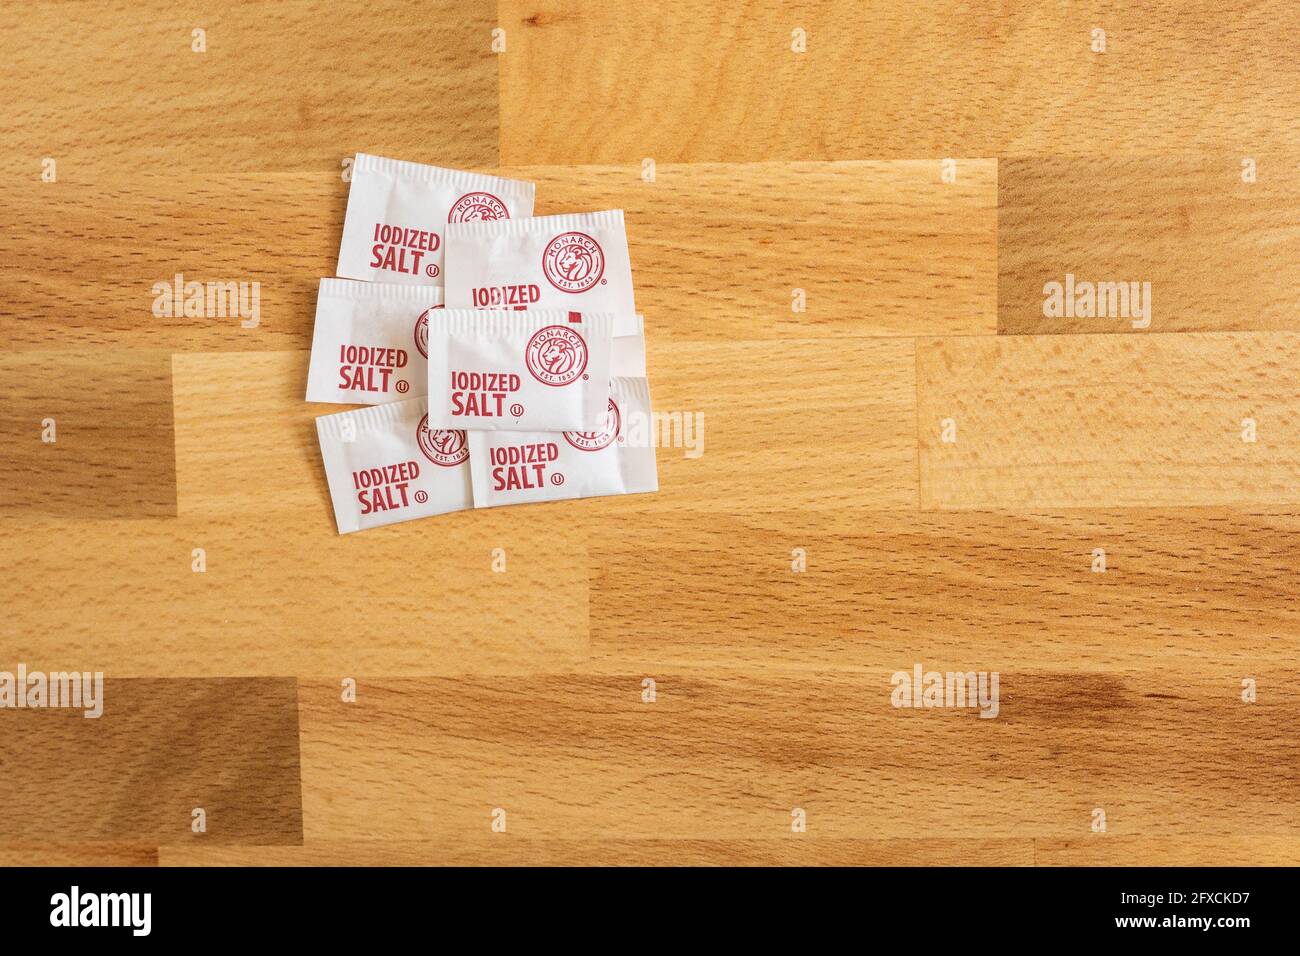 Flourtown, PA - May 26, 2021: Single serving packets of salt by Monarch, one of US Foods brands. US Foods is a leading foodservice distributor. Stock Photo